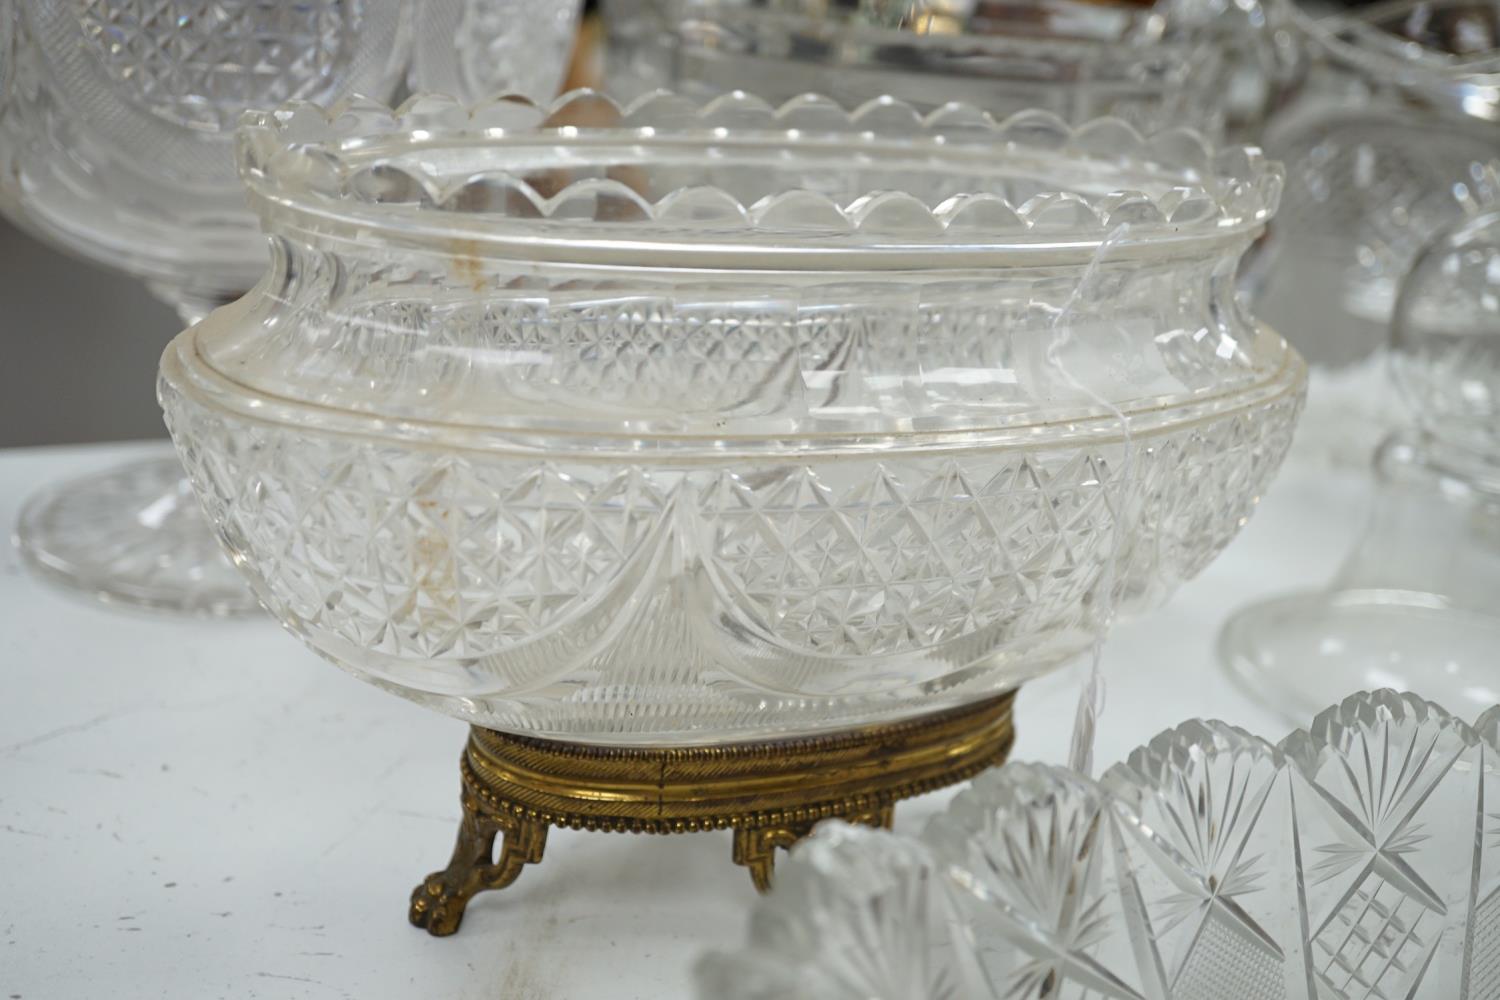 An early 20th century oval cut glass bowl on gilt metal stand, a pair of slice cut decanters and - Image 5 of 6